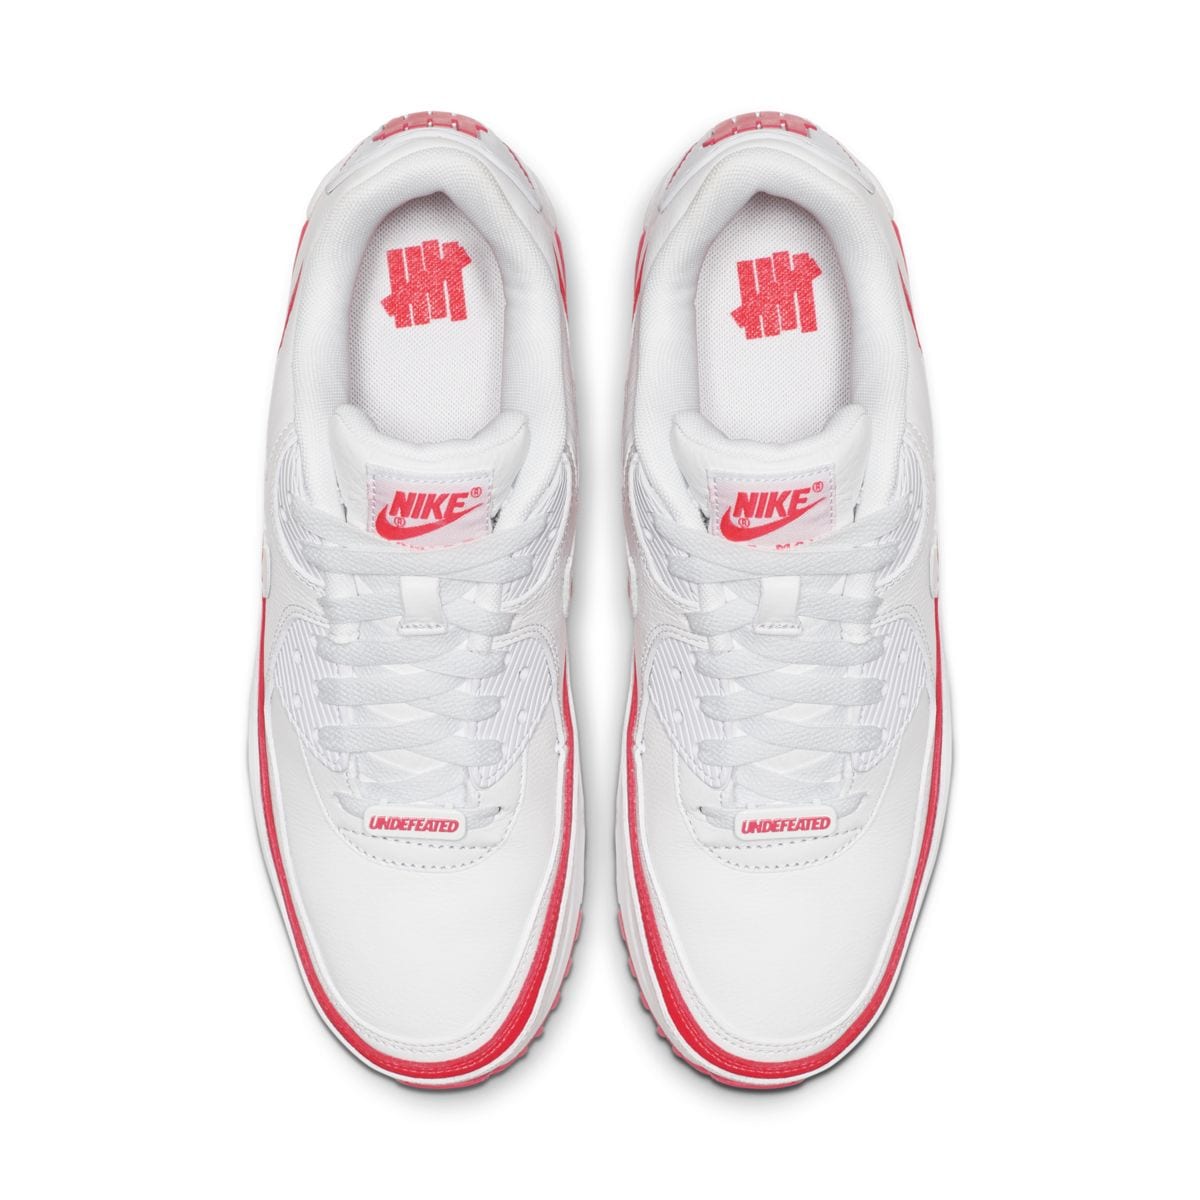 Undefeated x Nike Air Max 90 White Solar Red CJ7197-103 4